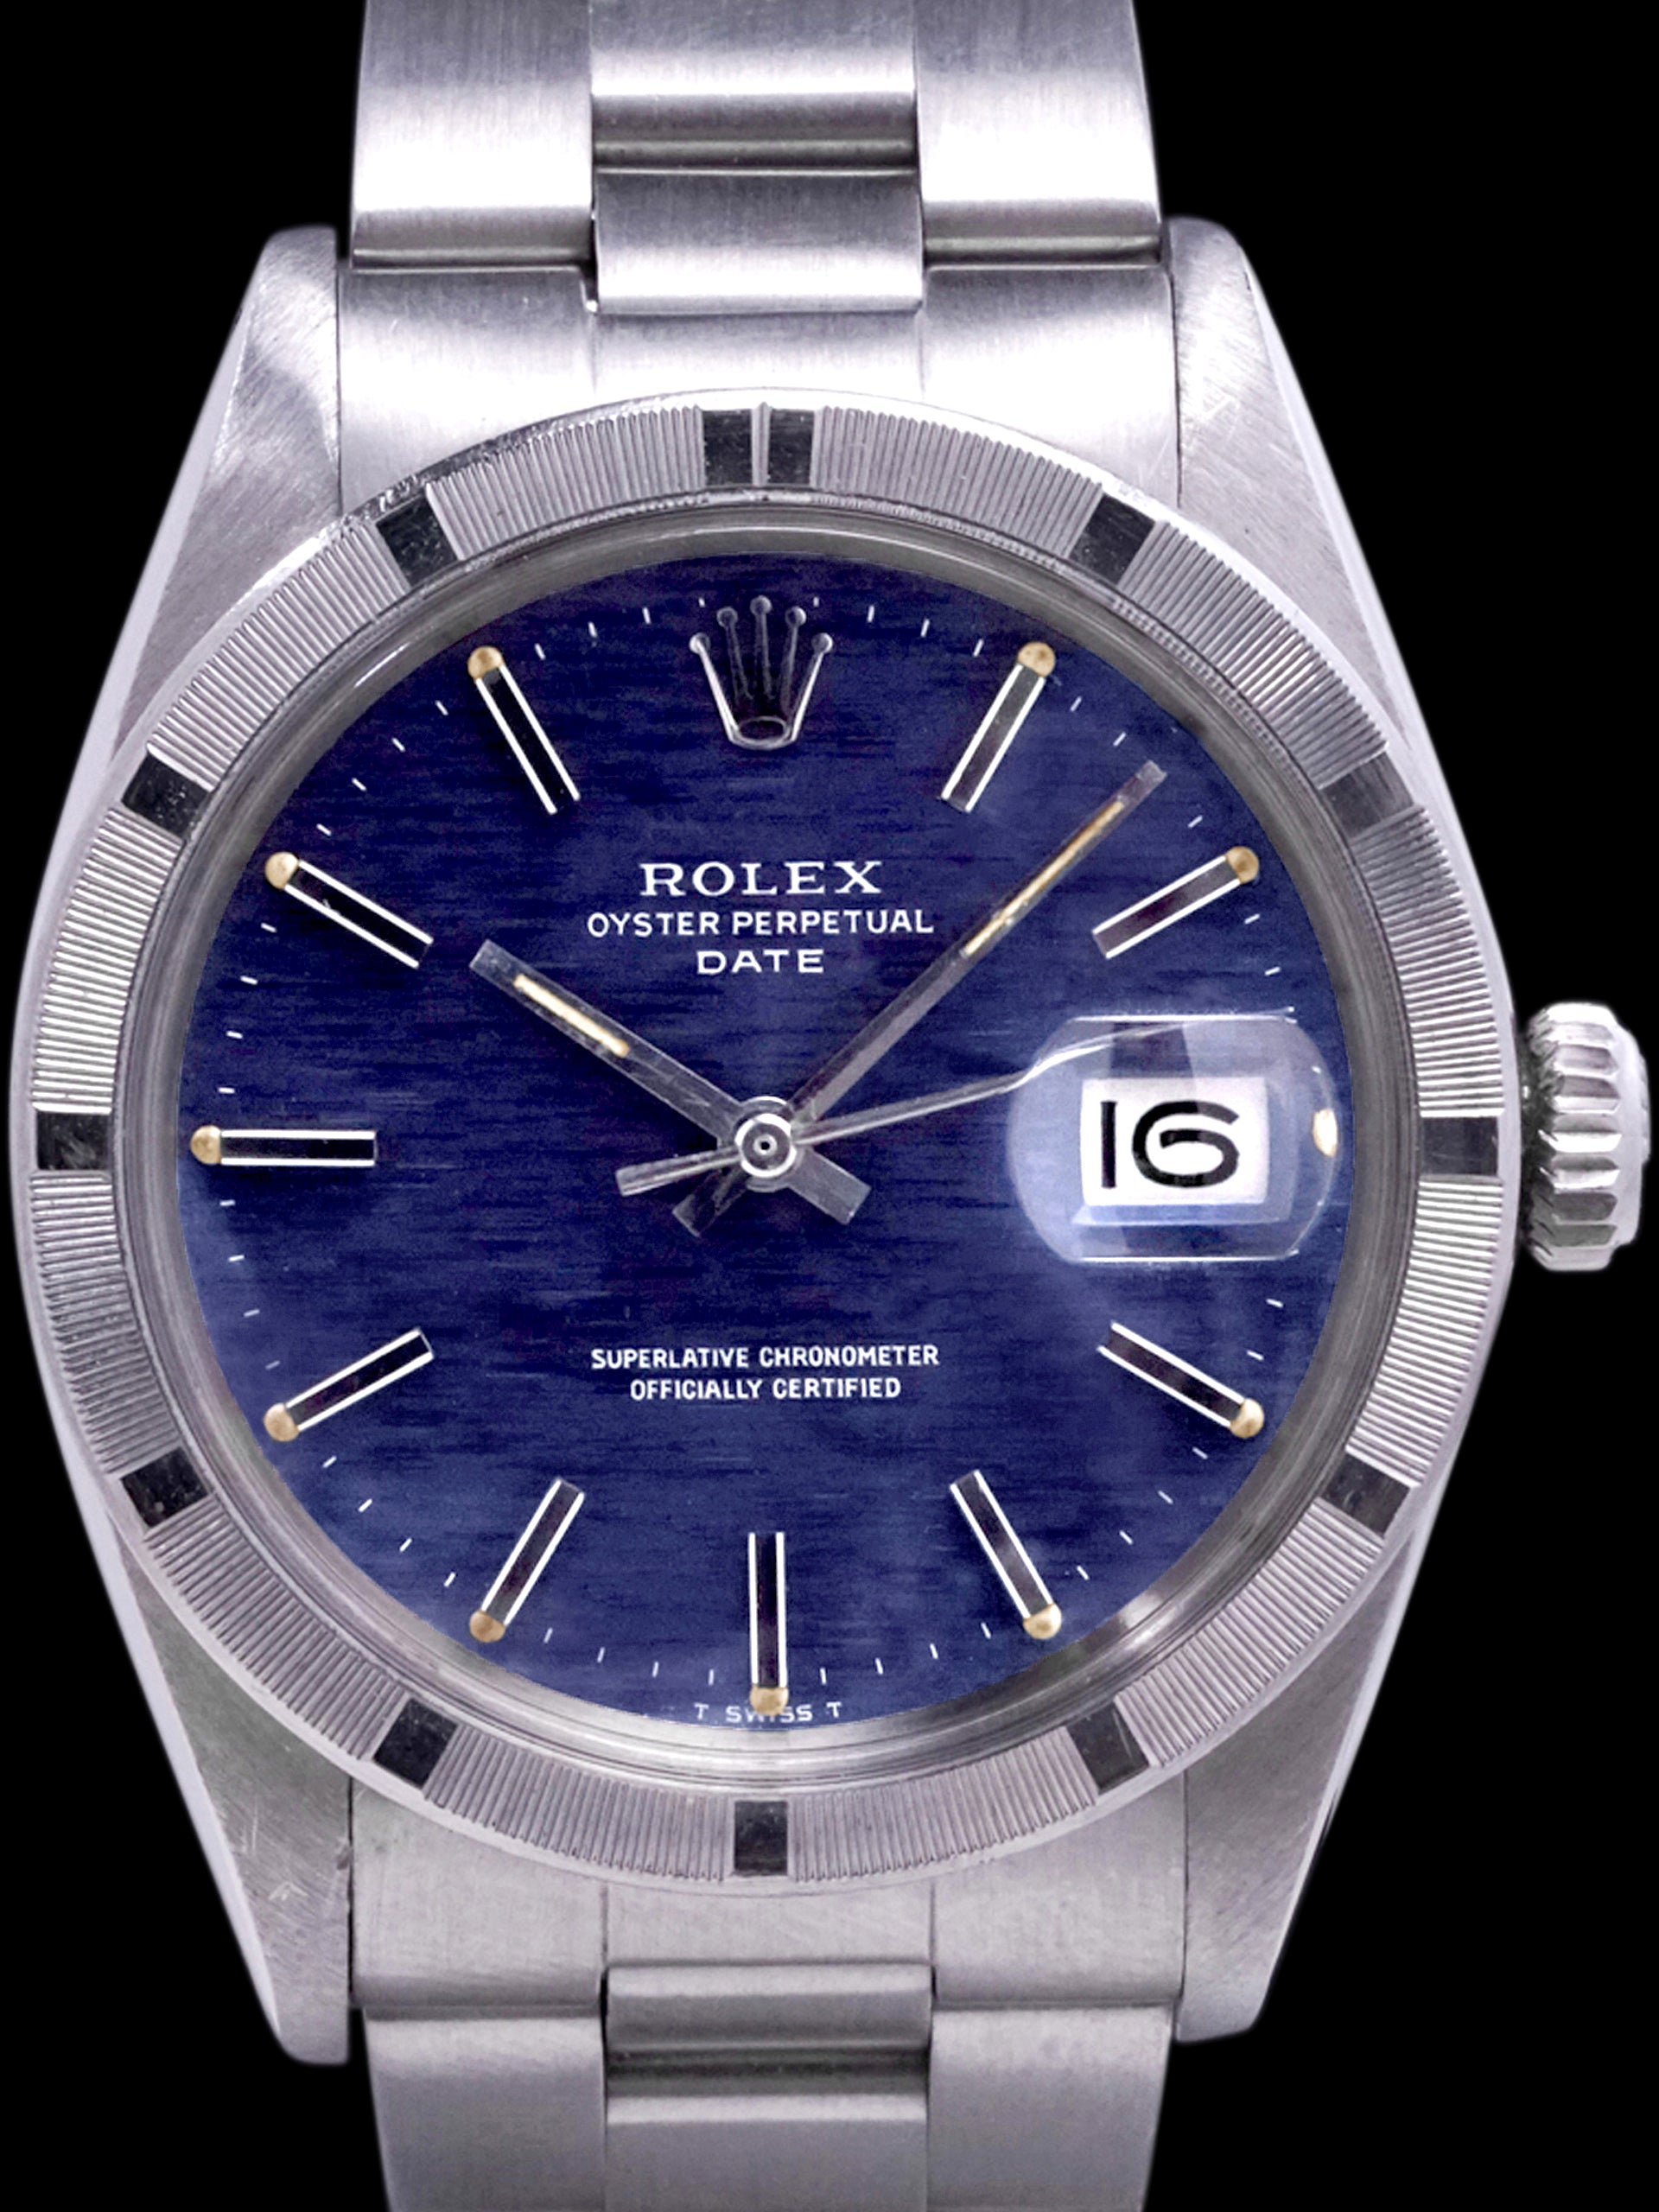 1971 Rolex Oyster-Perpetual Date (Ref. 1501) "Blue Mosaic Dial"